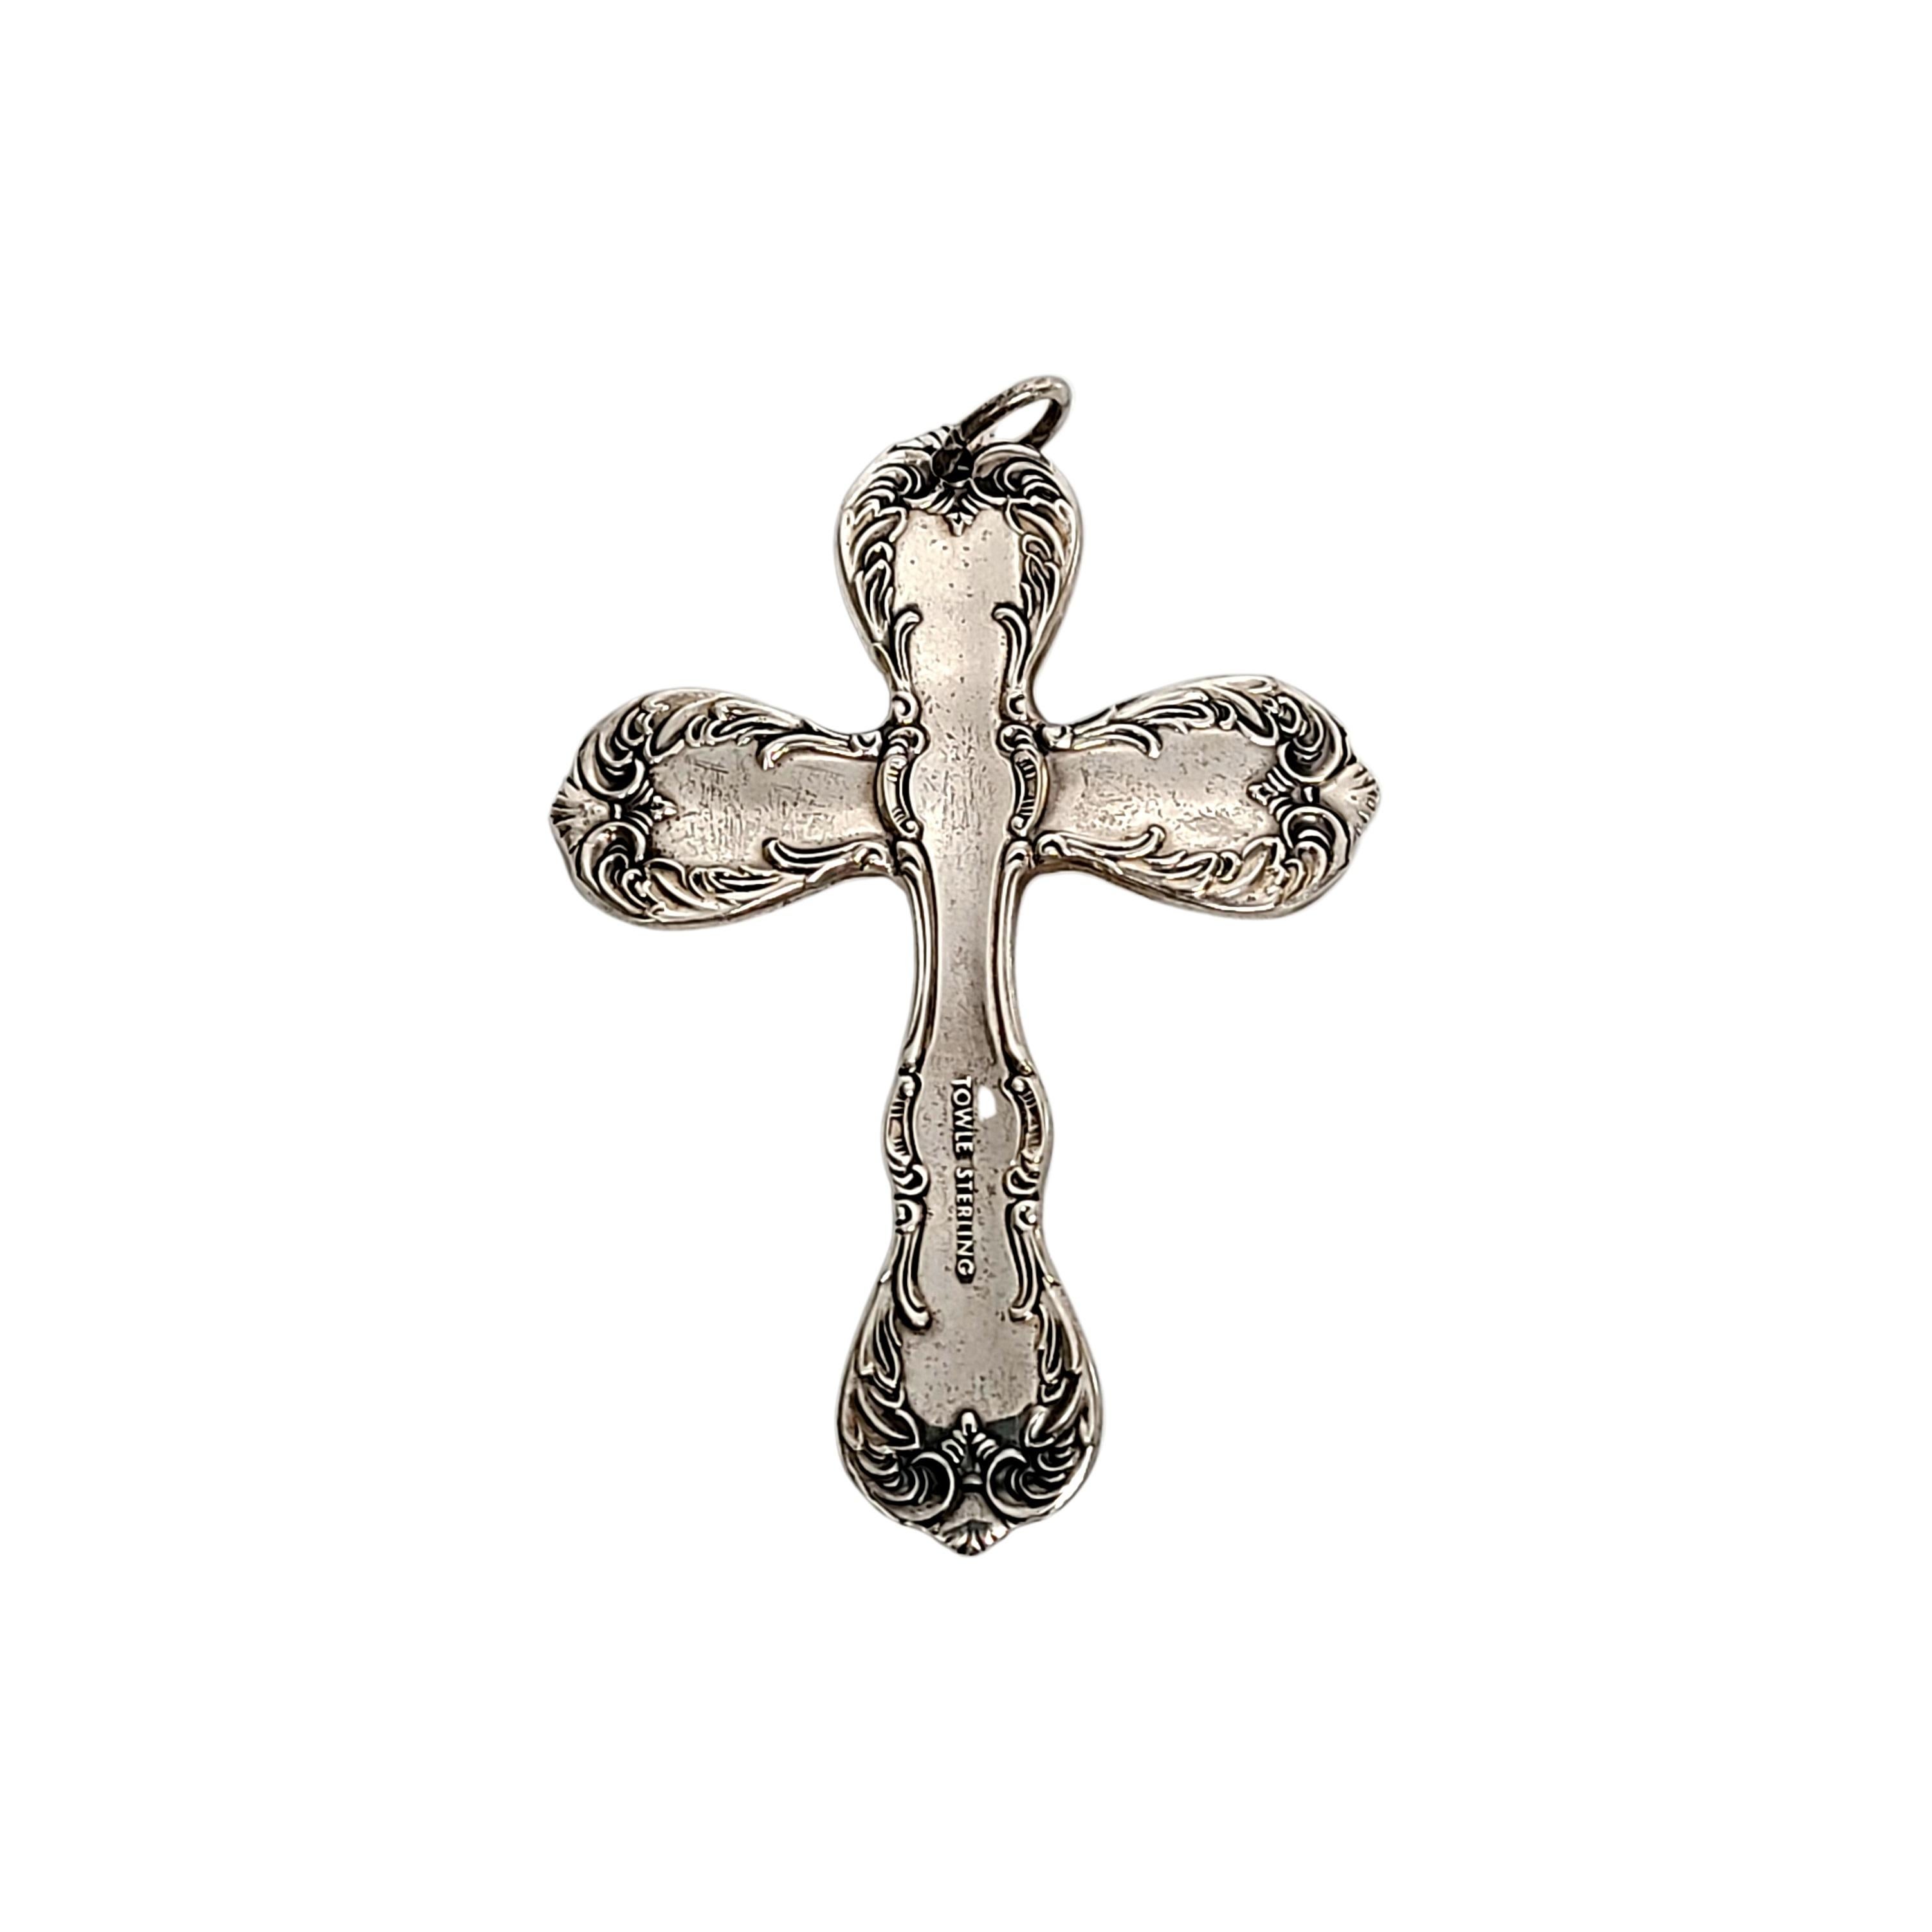 Sterling silver cross in Towle's Old Master flatware pattern.

Cross features the design from the ends of handles in Towle's Old Master pattern, with a small floral accent at the center. Can be used as a pendant or an ornament,

Measures 2 1/2